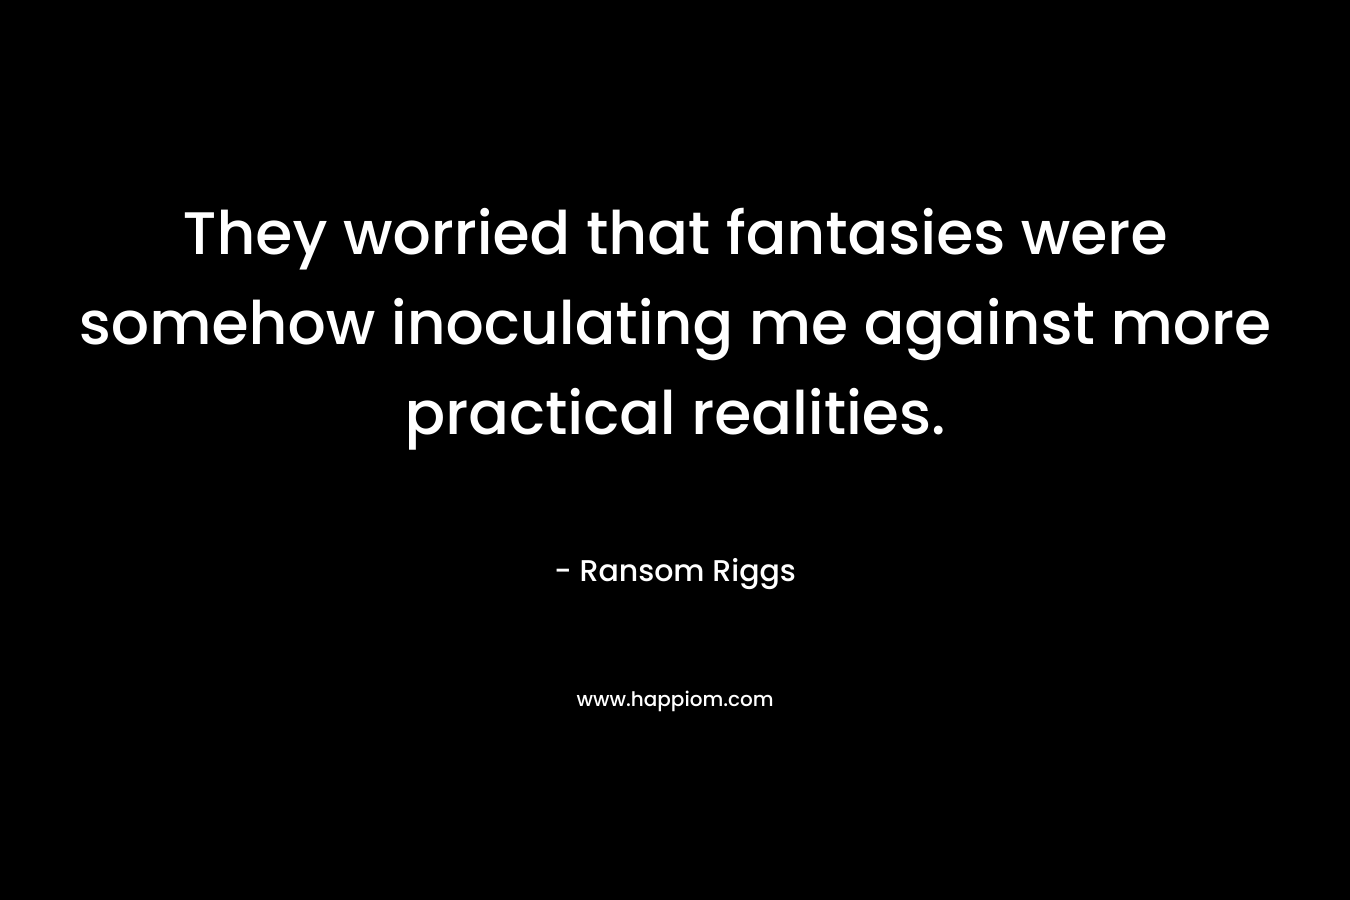 They worried that fantasies were somehow inoculating me against more practical realities. – Ransom Riggs